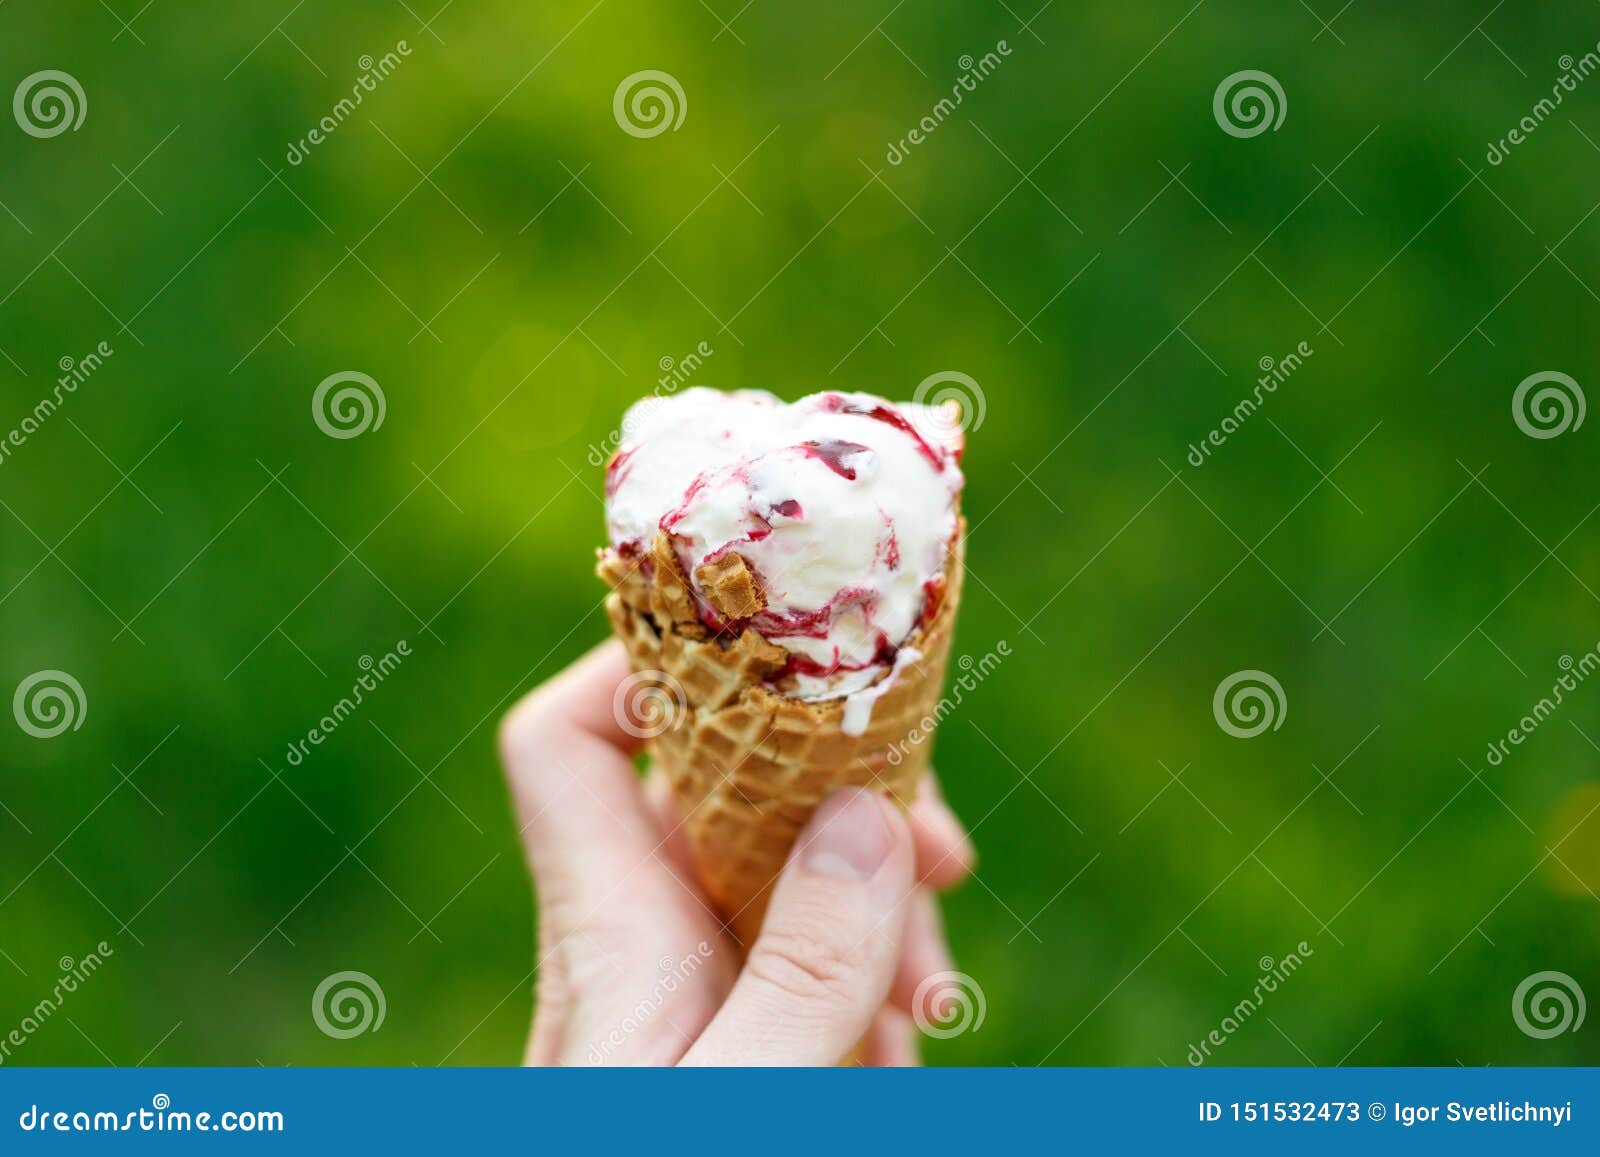 The hand holds a juicy, appetizing ice cream on the background of a natural background. Bright sunny day. Soft focus. Ice cream close-up